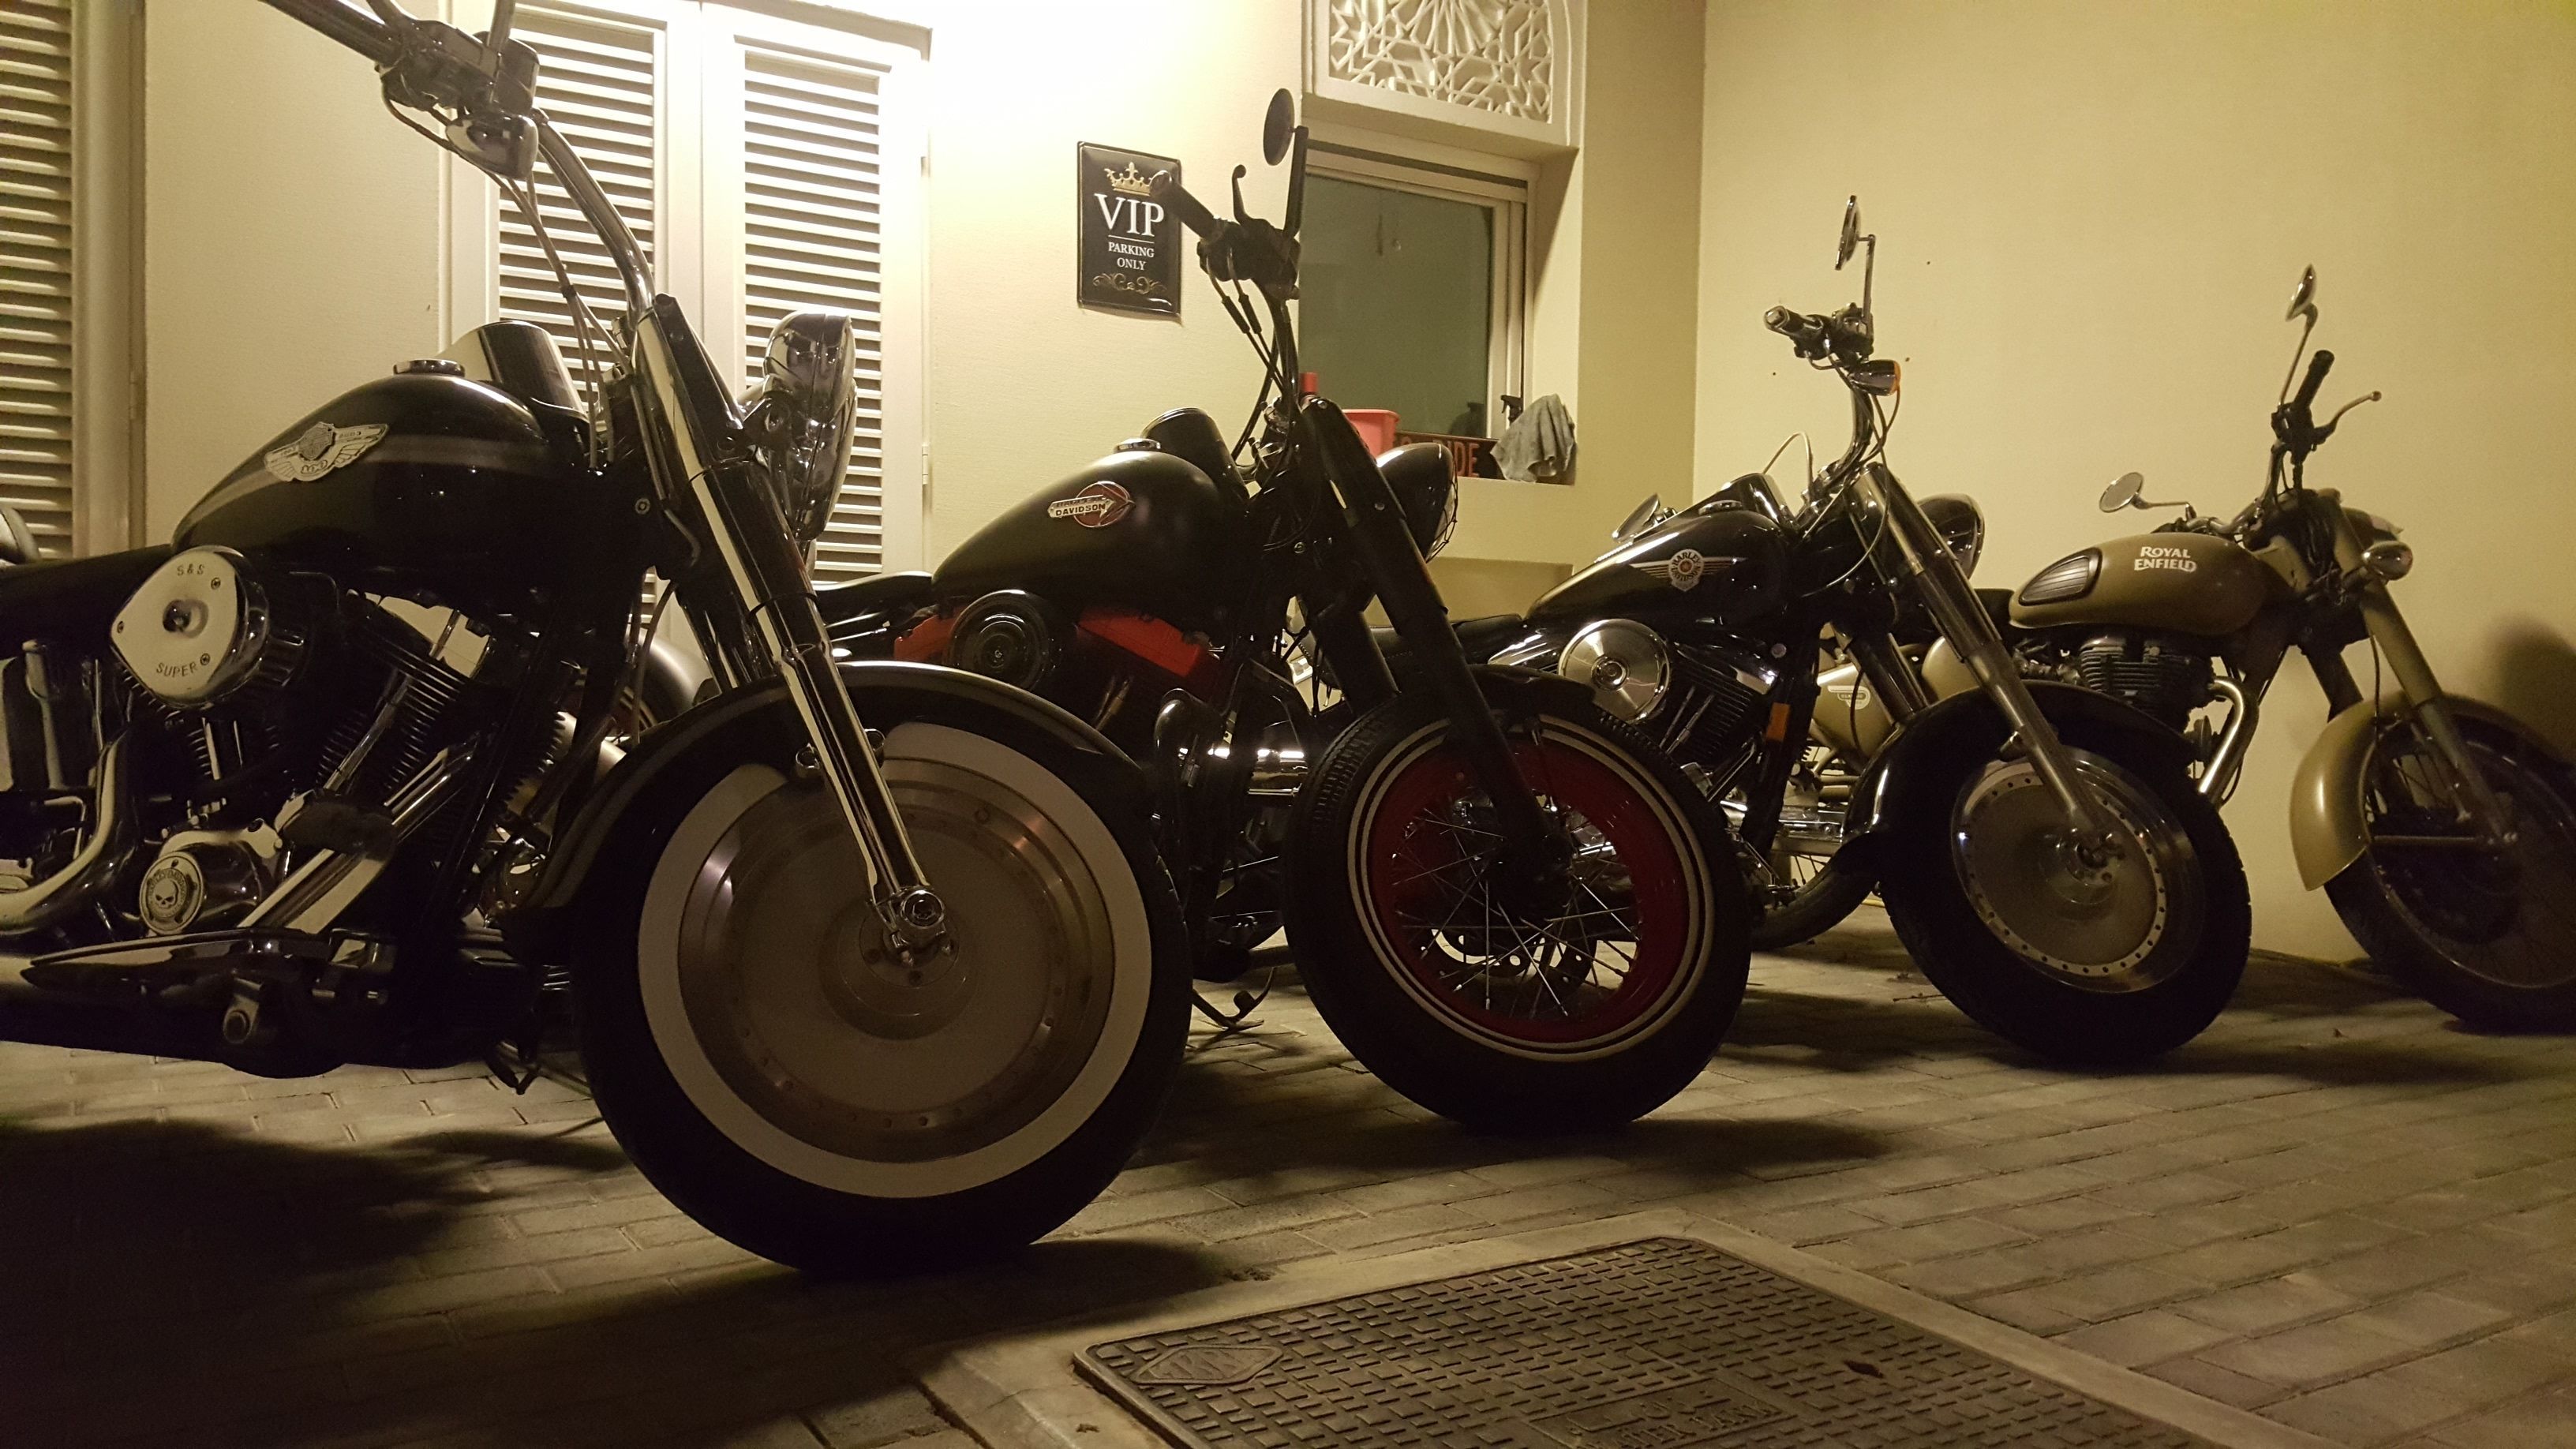 4 of our bikes